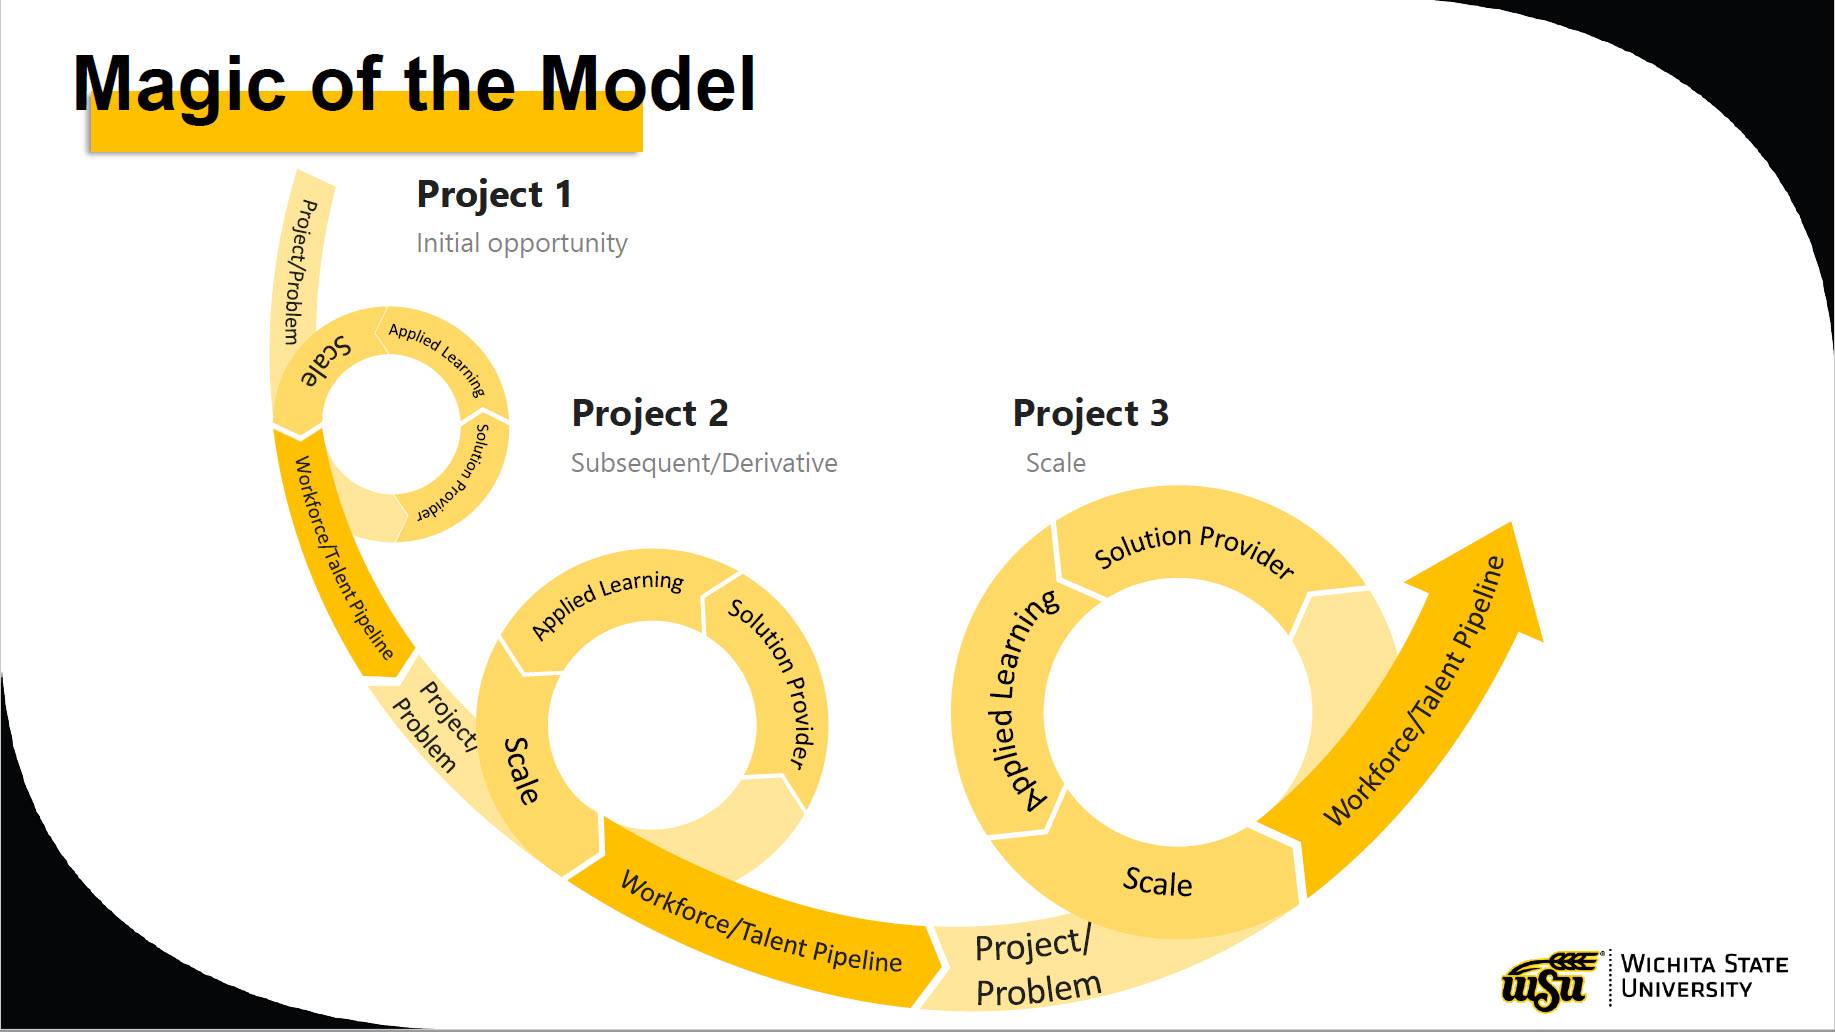 Infographic titled “Magic of the Model.” Infographic shows a three project process flow. Project 1 is titled Initial Opportunity, Project 2 is titled Subsequent/Derivative, and Project 3 is titled Scale. Each of the three projects contains the steps Project/Problem, Solution Provider, Applied Learning, Scale, and Workforce/Talent Pipeline.     